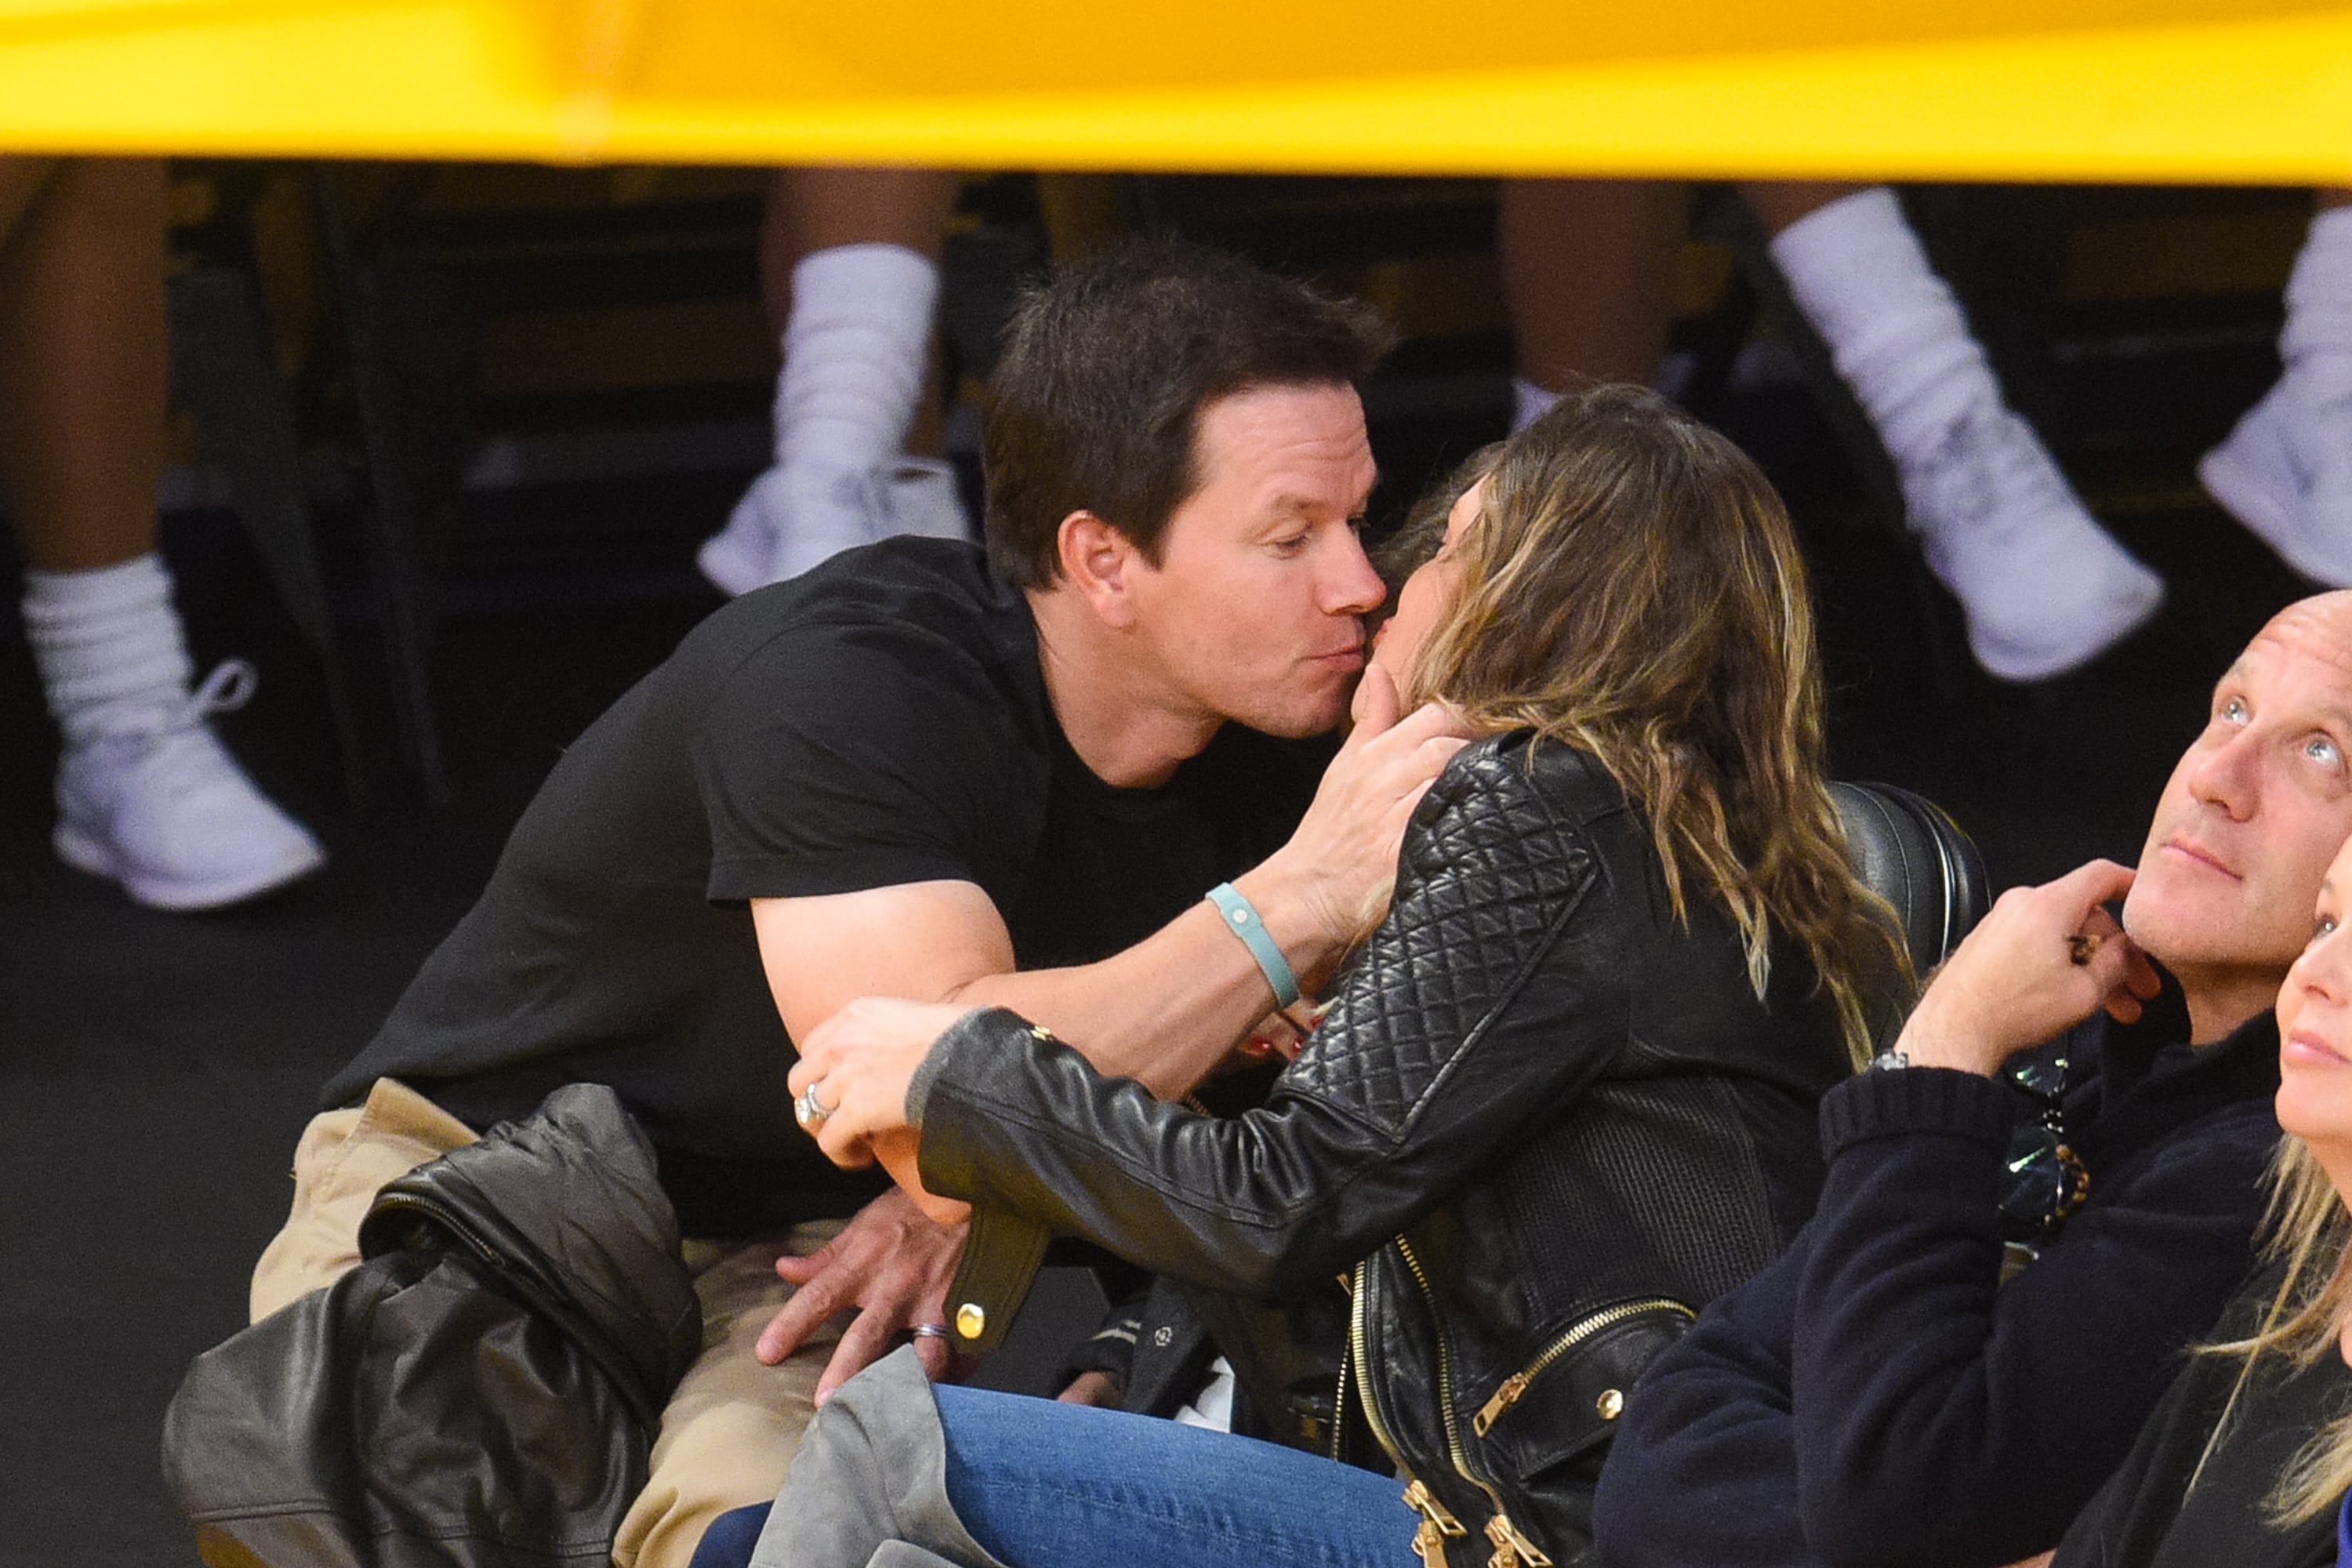 Mark Wahlberg and Rhea Durham's Relationship Timeline